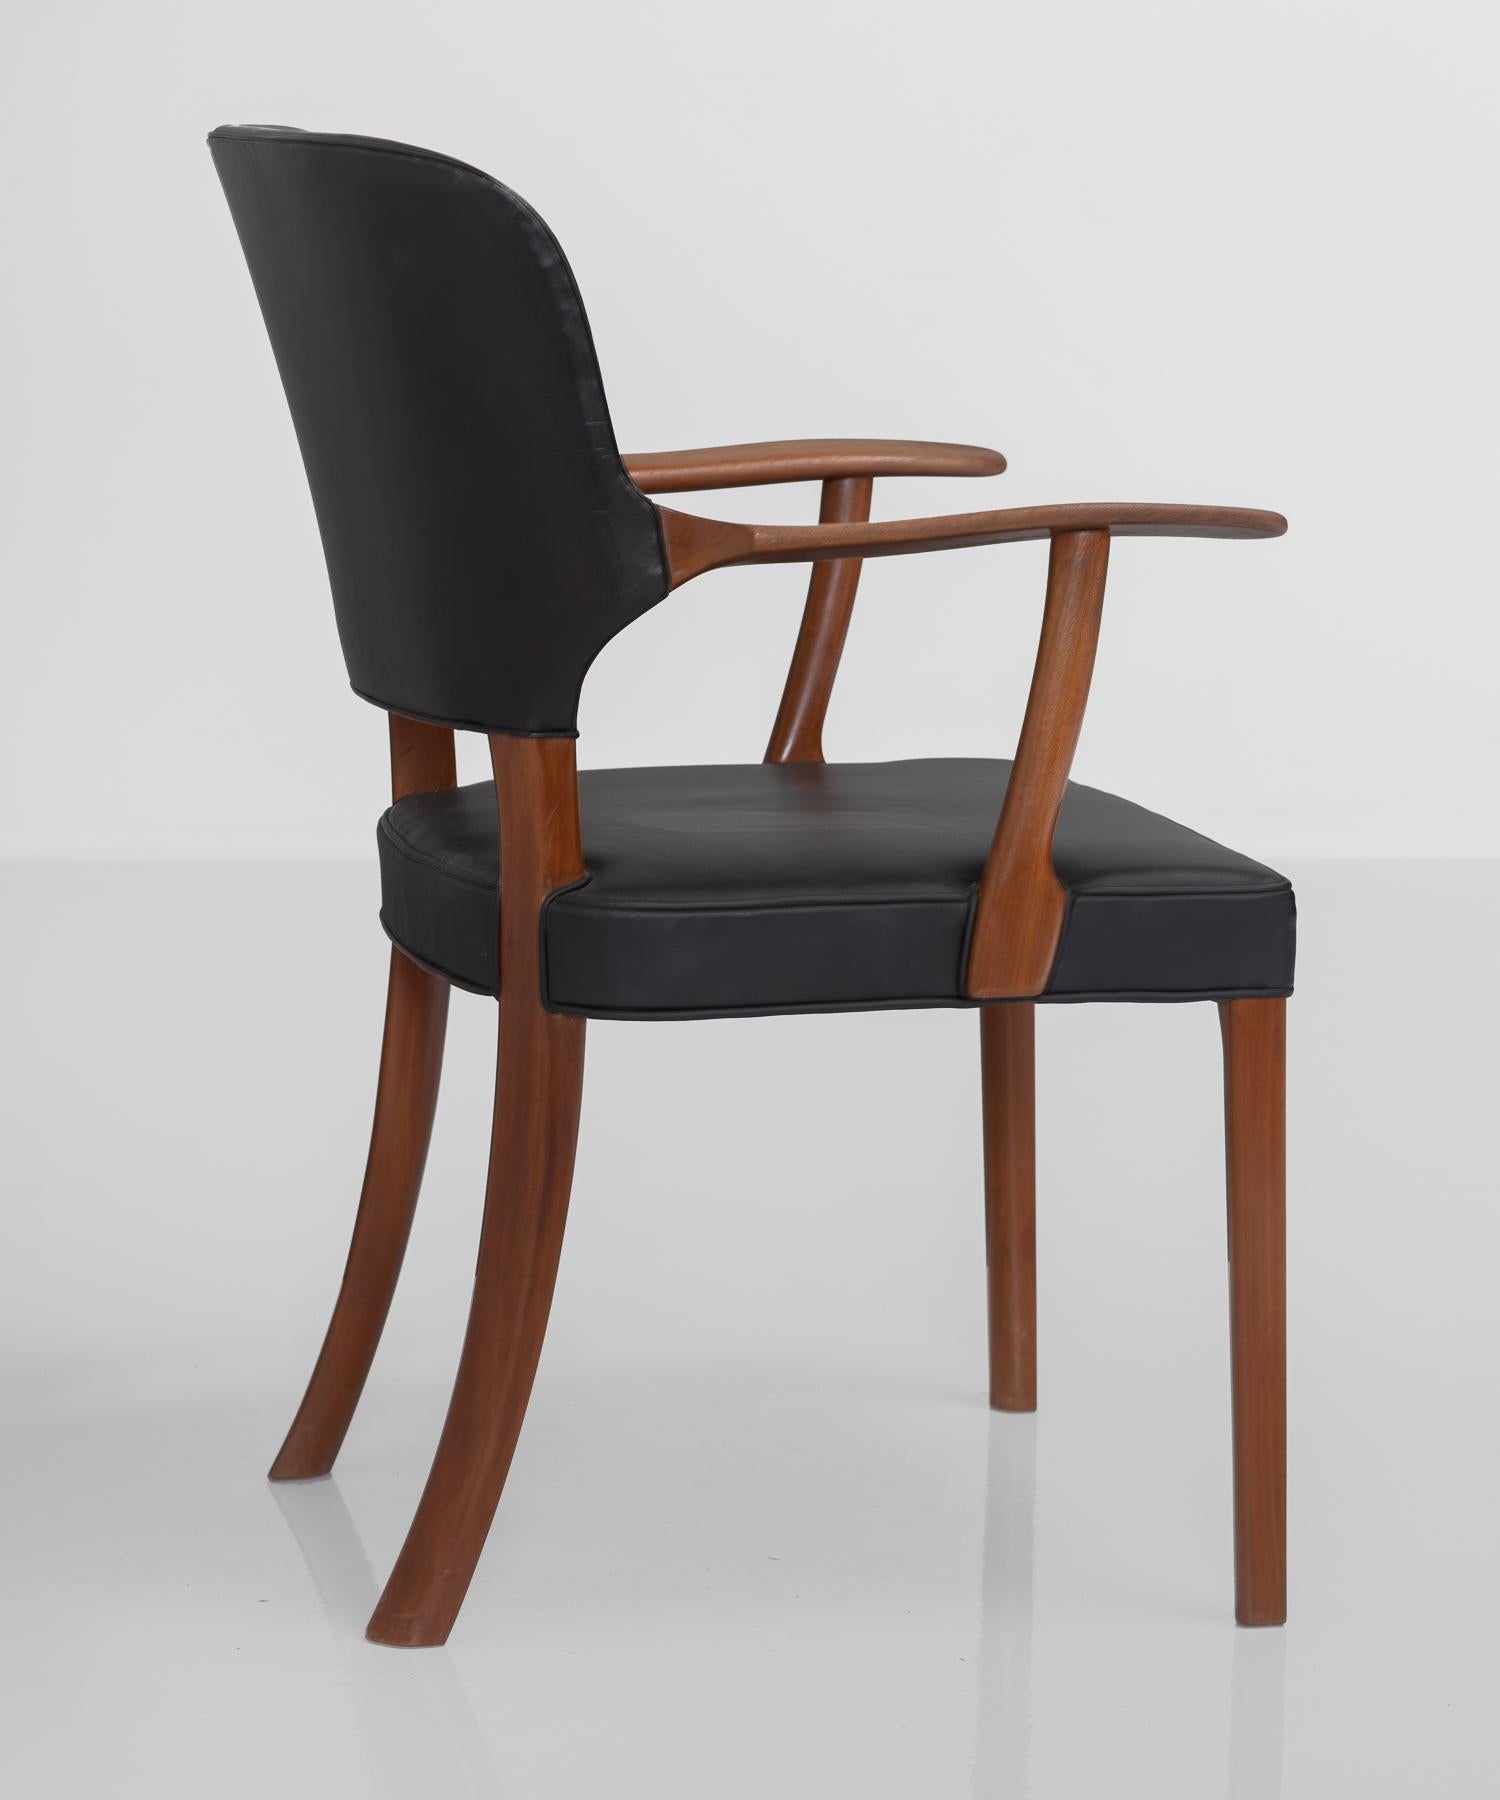 Mahogany and black leather armchair by Ole Wanscher, Denmark, circa 1940.

Beautifully designed chair constructed in mahogany with leather upholstery. Designed by Ole Wanscher for Danish cabinetmaker A.J. Iversen.